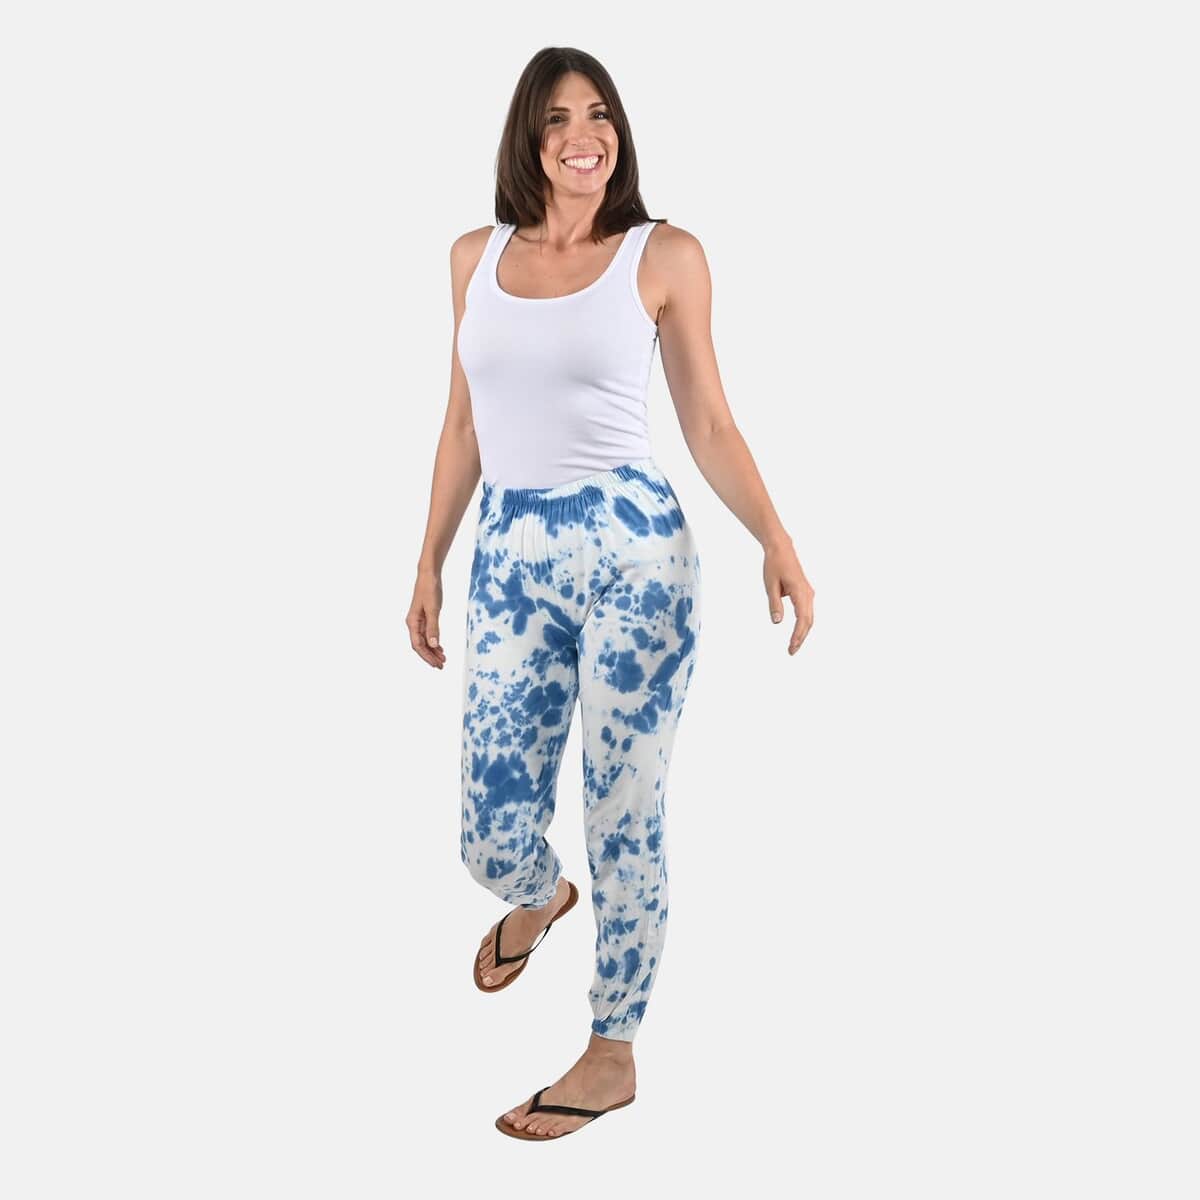 Tamsy Blueberry Tie Dye Fleece Lounge Pant - S image number 0